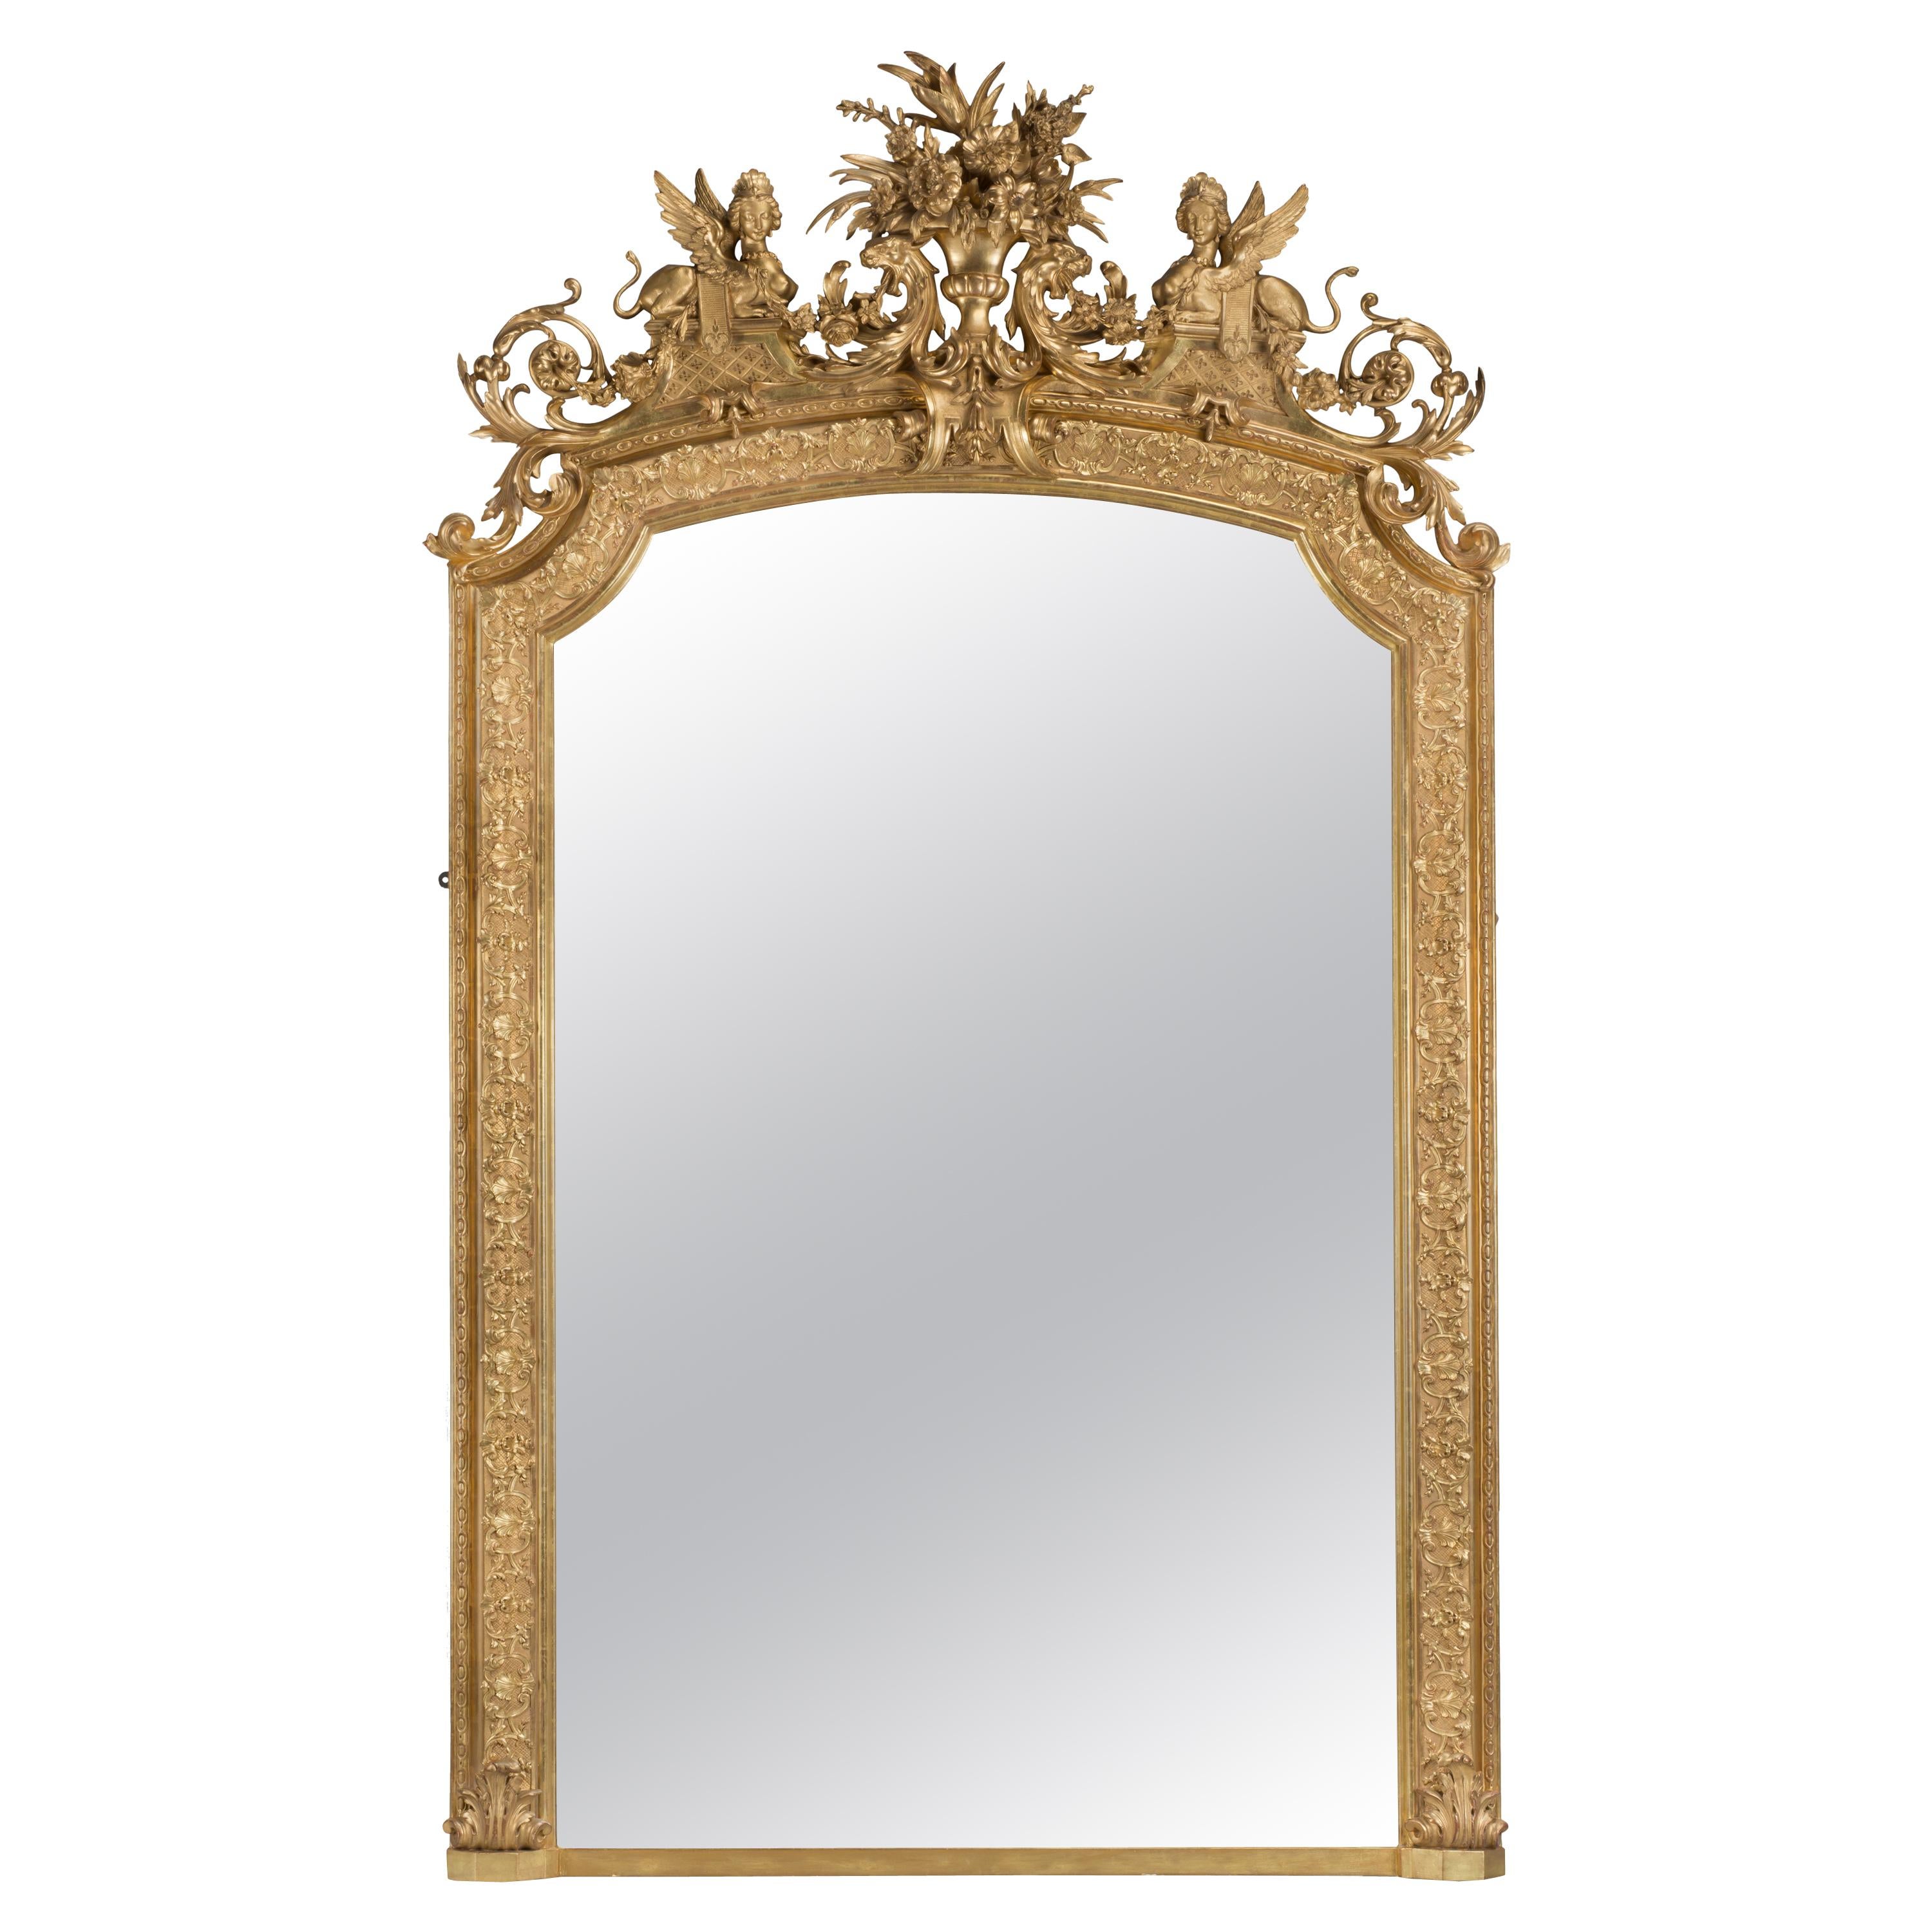 Impressive Louis XVI Style Carved Giltwood and Gesso Mirror, French, circa 1890